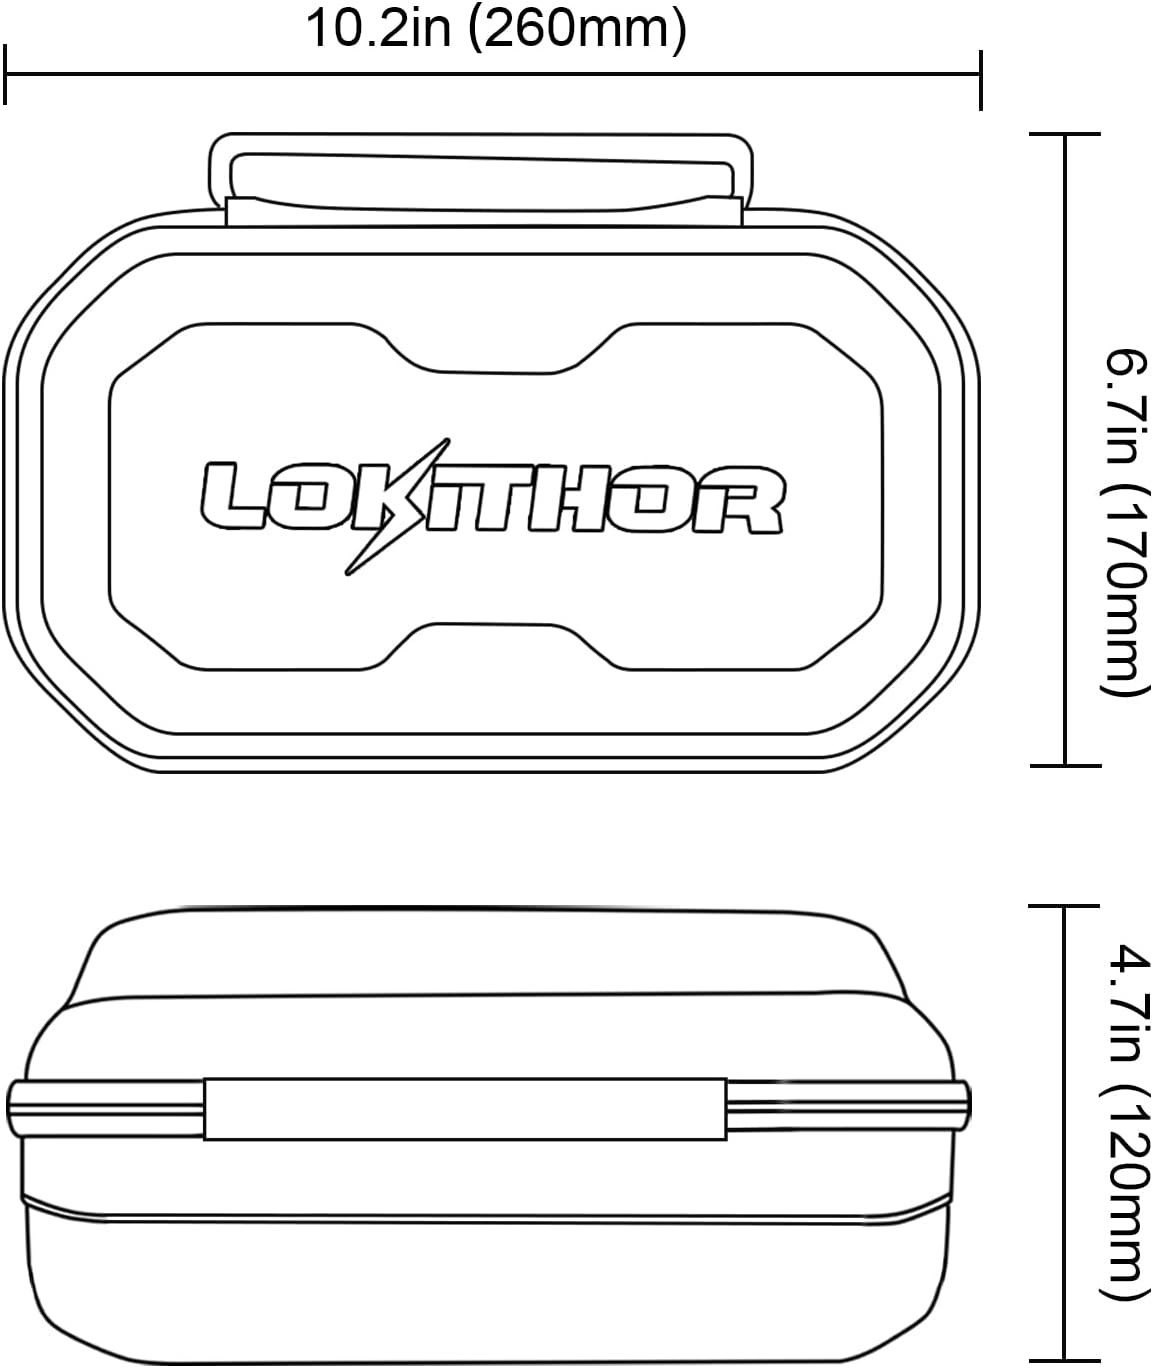 EVA Protection Case for LOKITHOR LO-J1500 and LO-J402 Jump Starters